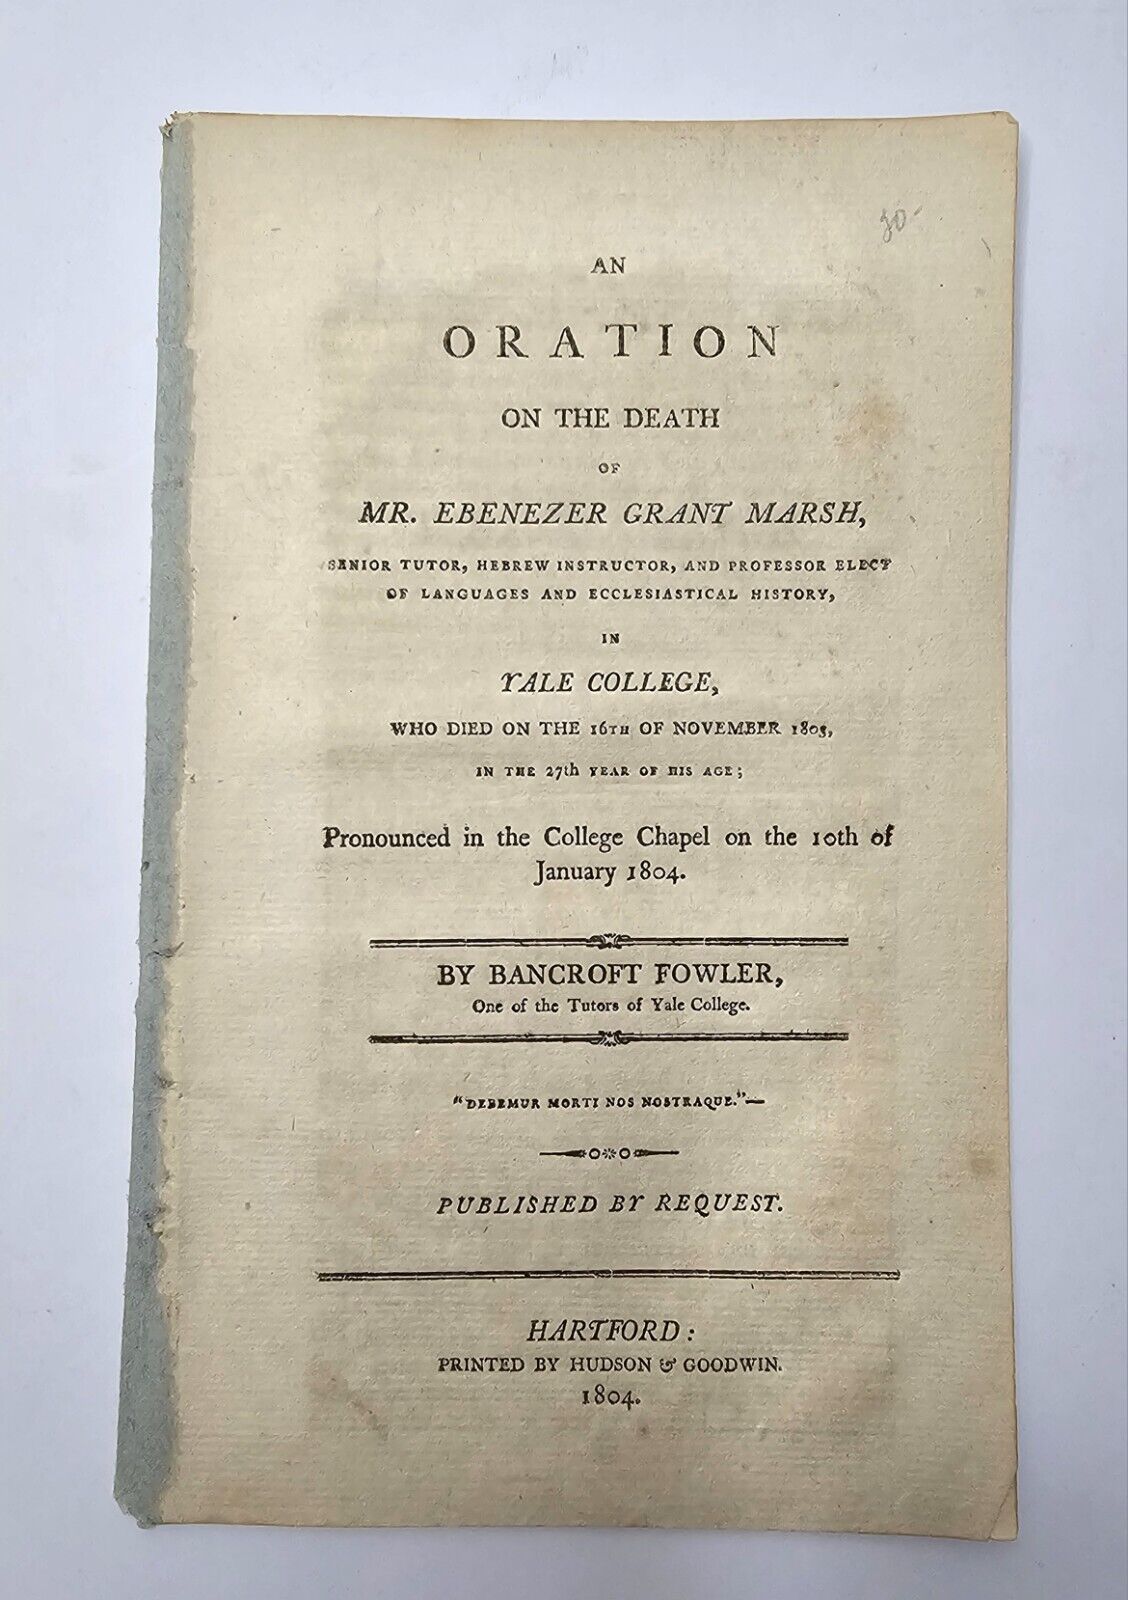 Original 1804 Oration on the Death of Ebenezer Grant Marsh at Yale New Haven, CT